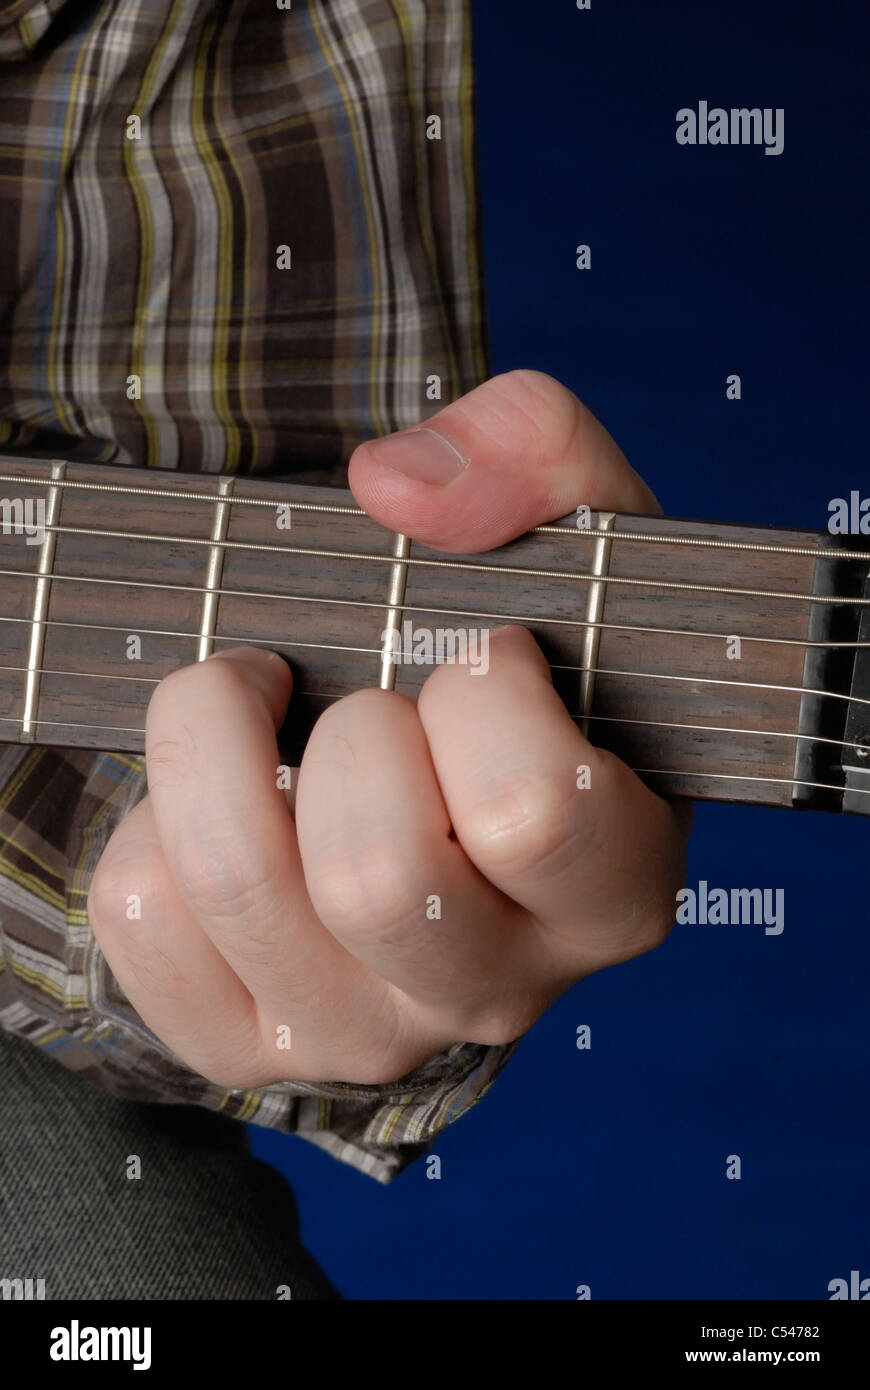 Man's hand demonstrating a D Chord on guitar Stock Photo